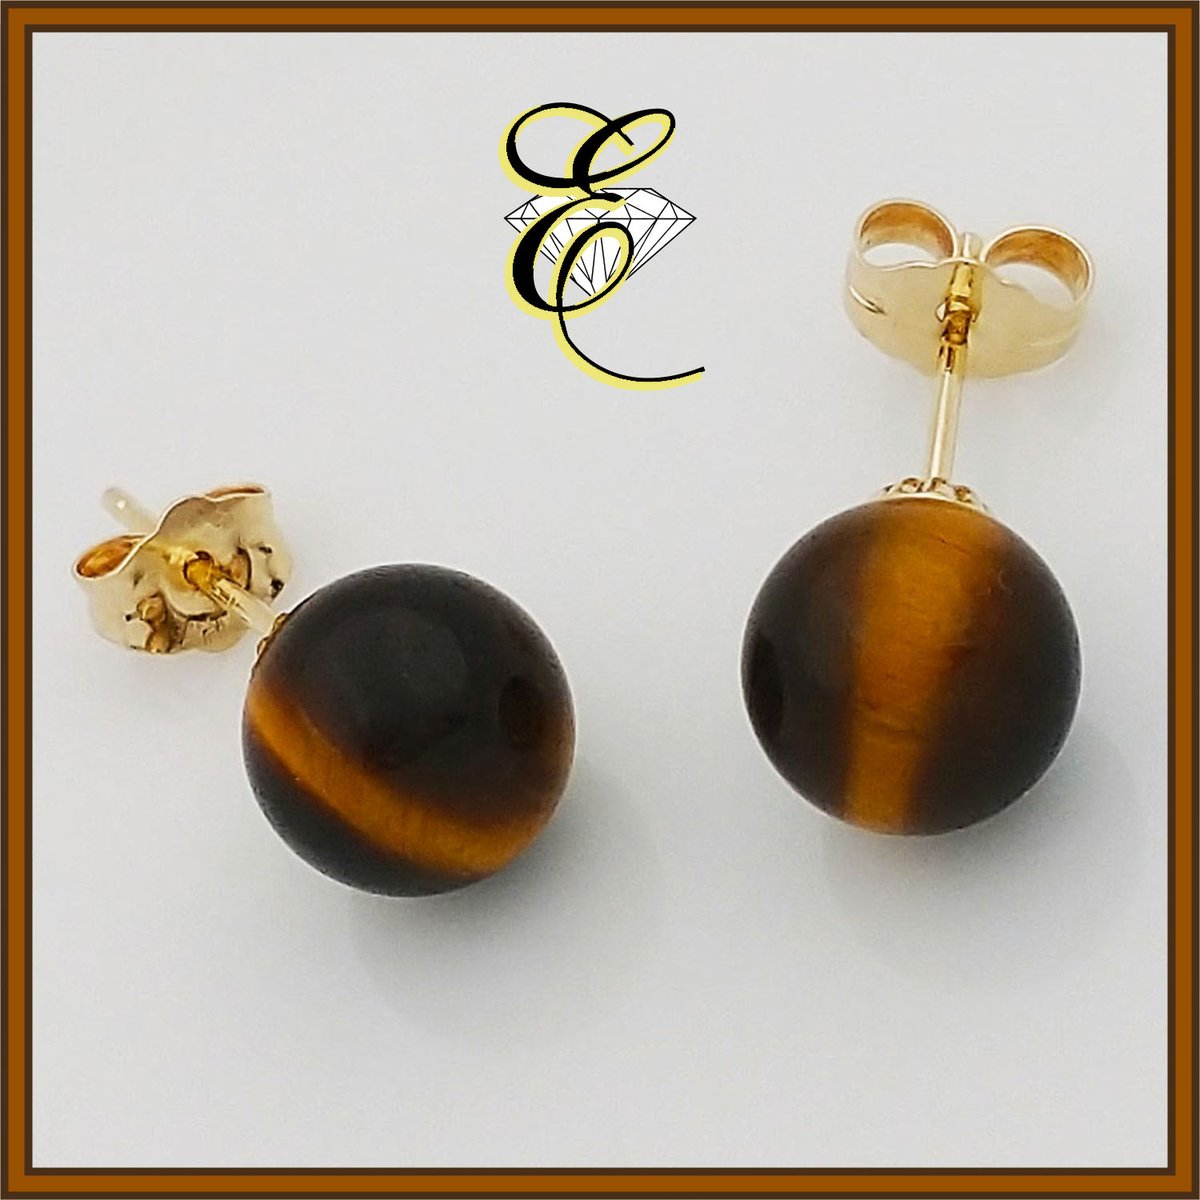 Pair of 14K yellow gold pierced Earrings, each with an 8mm Tiger's Eye Quartz on posts with friction backs. From Our Estate Collection $100.

eichhornjewelry.com
#estatejewelry #tigerseyequartzjewelry